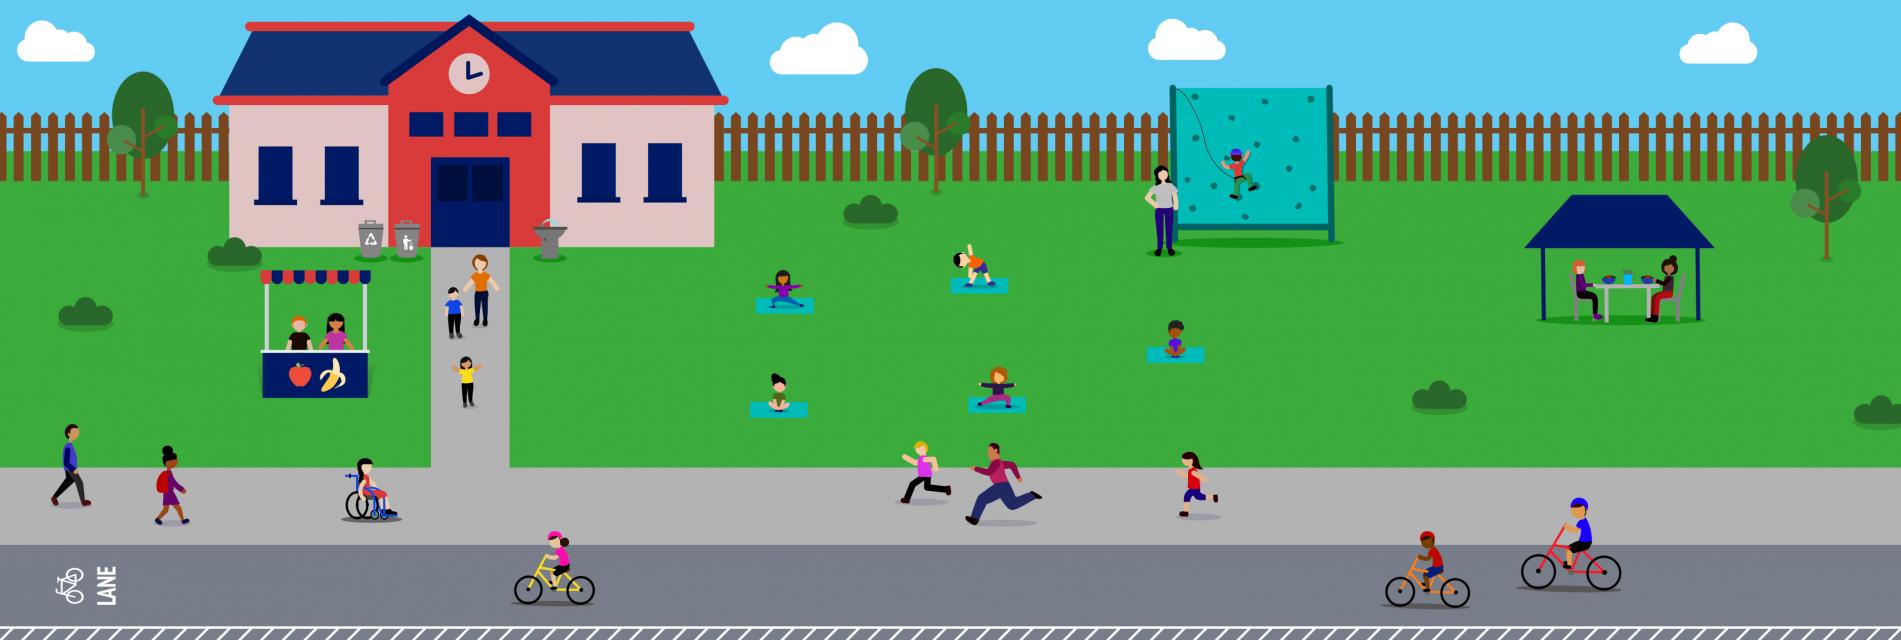 An illustration of children playing outdoors in their neighborhood with a number of park-related resources.